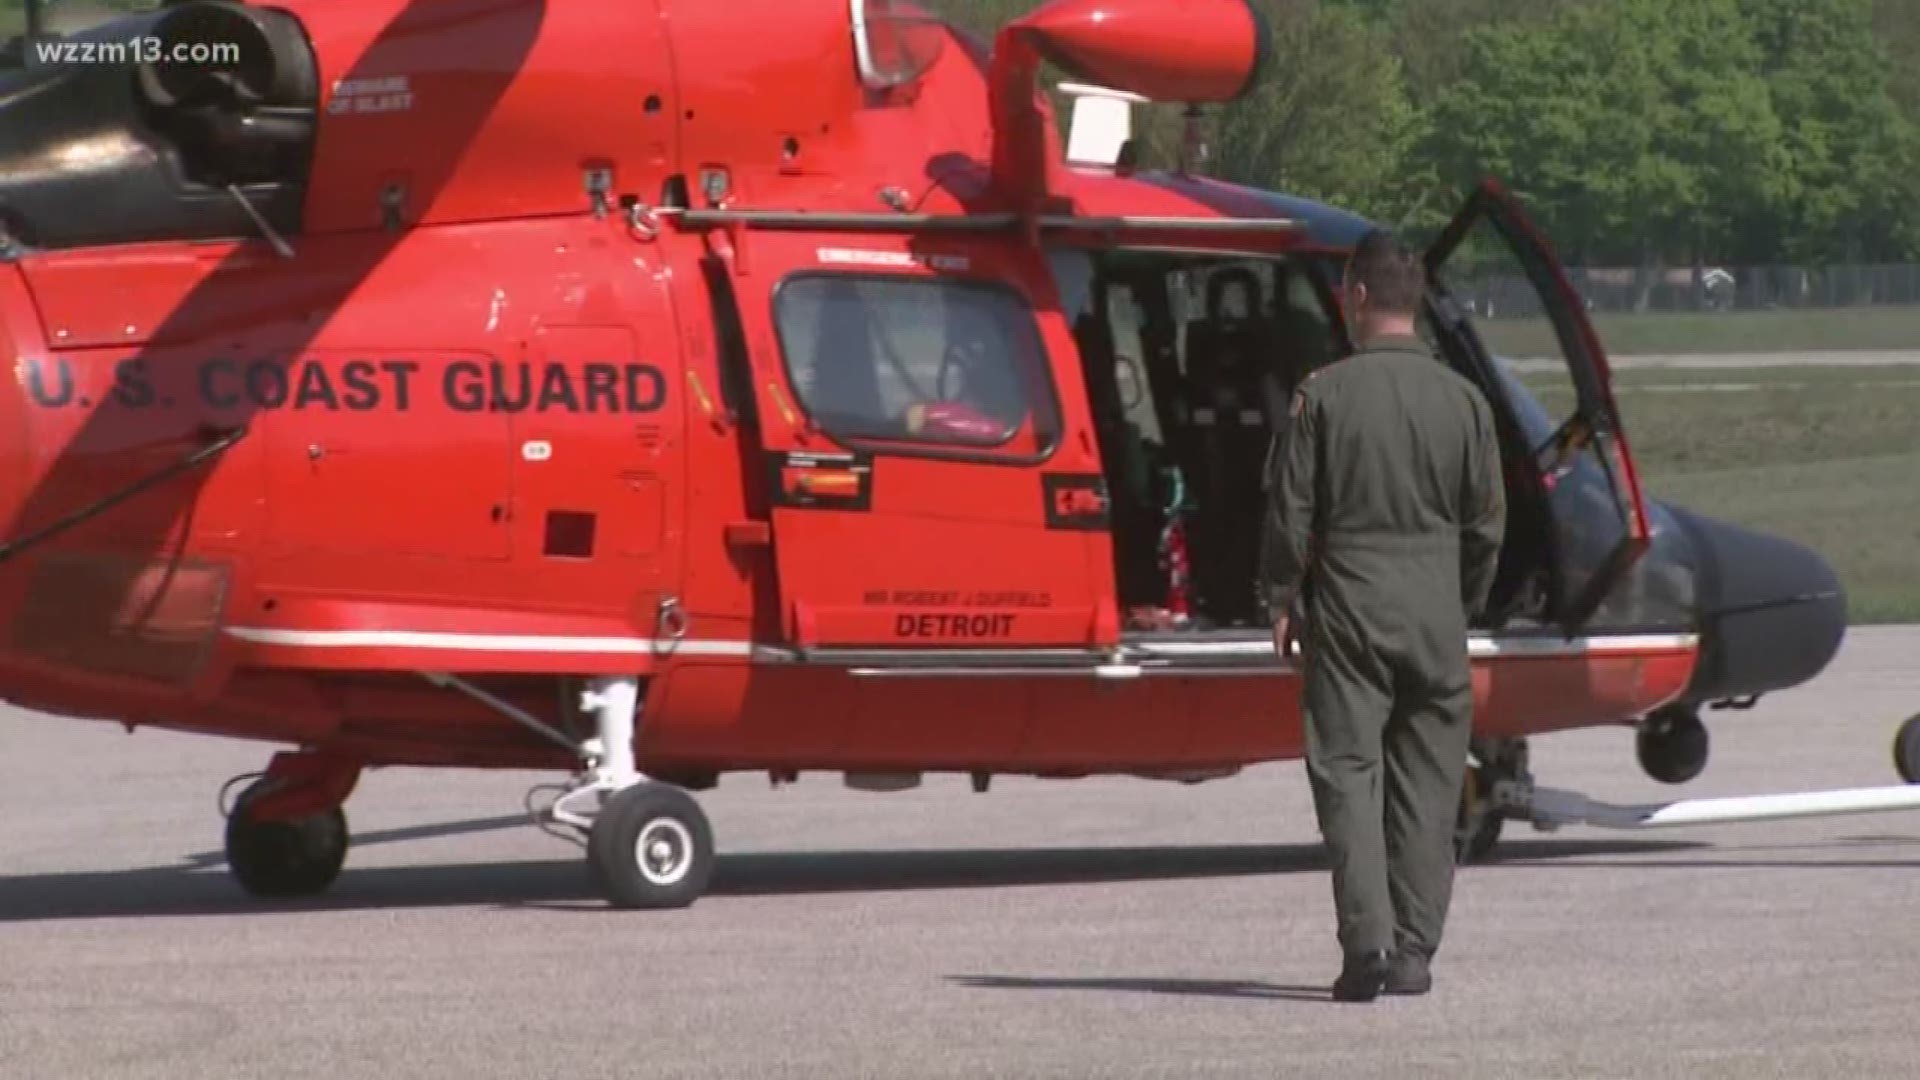 US Coast Guard Air Station in Muskegon opens for the summer